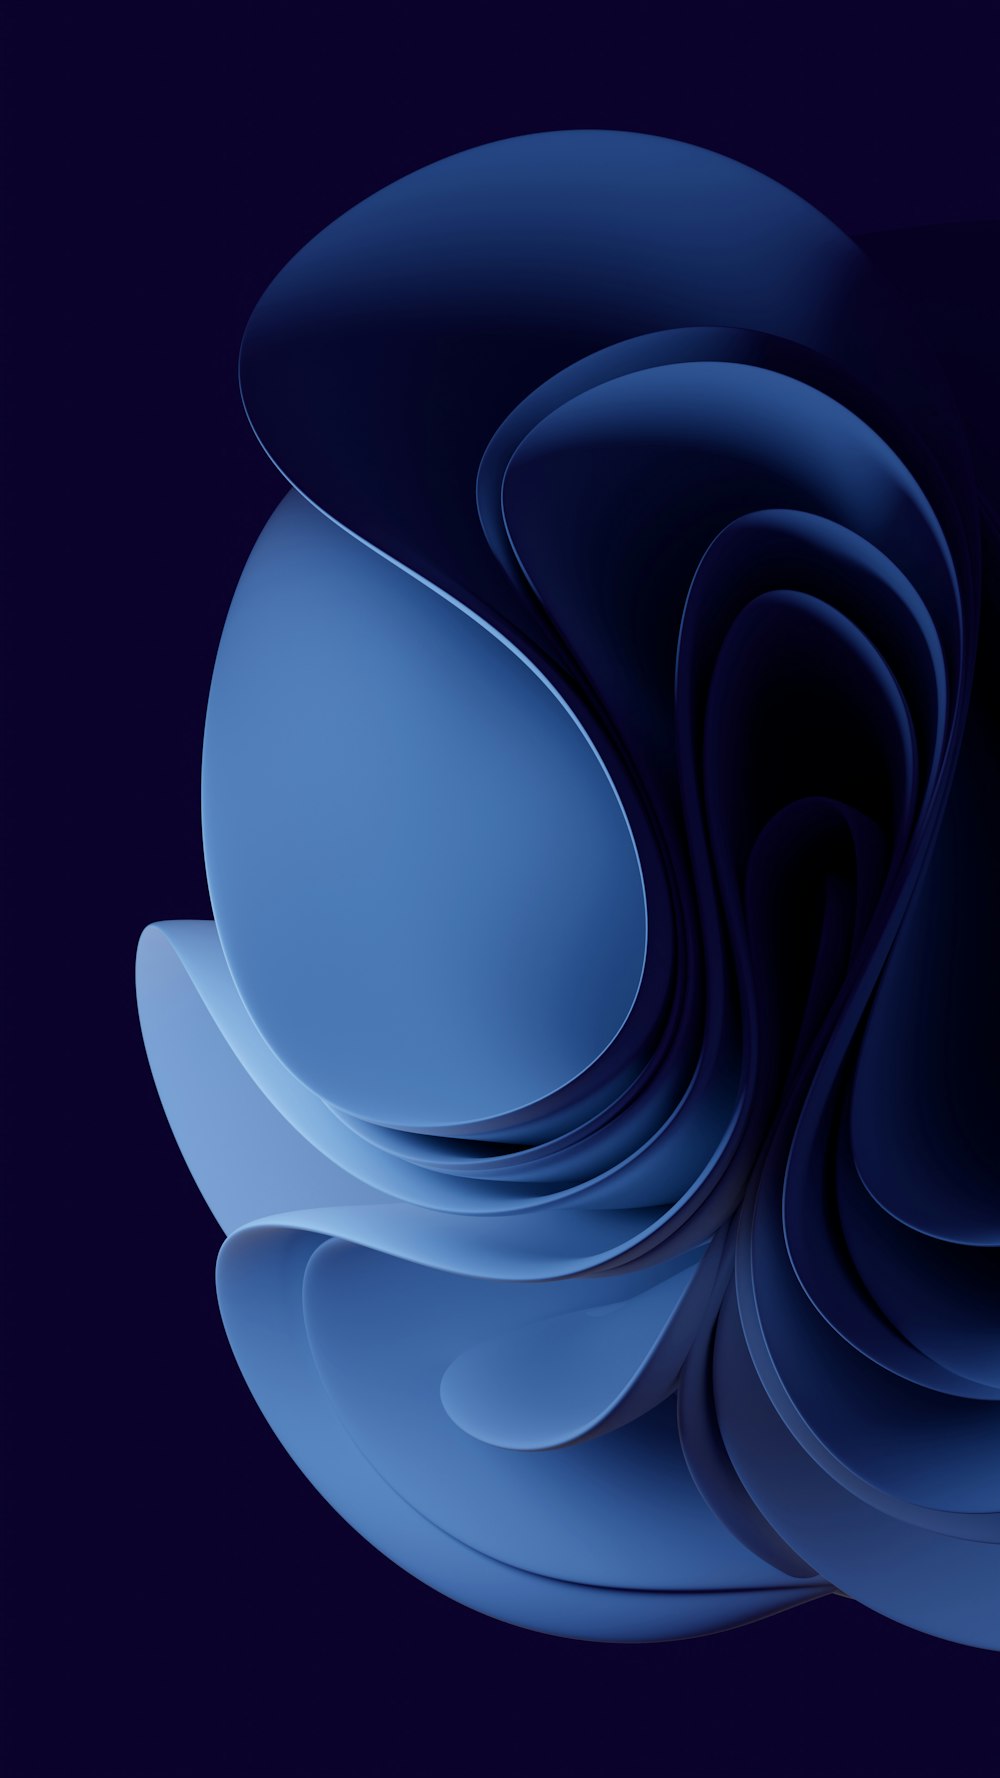 a computer generated image of a blue object